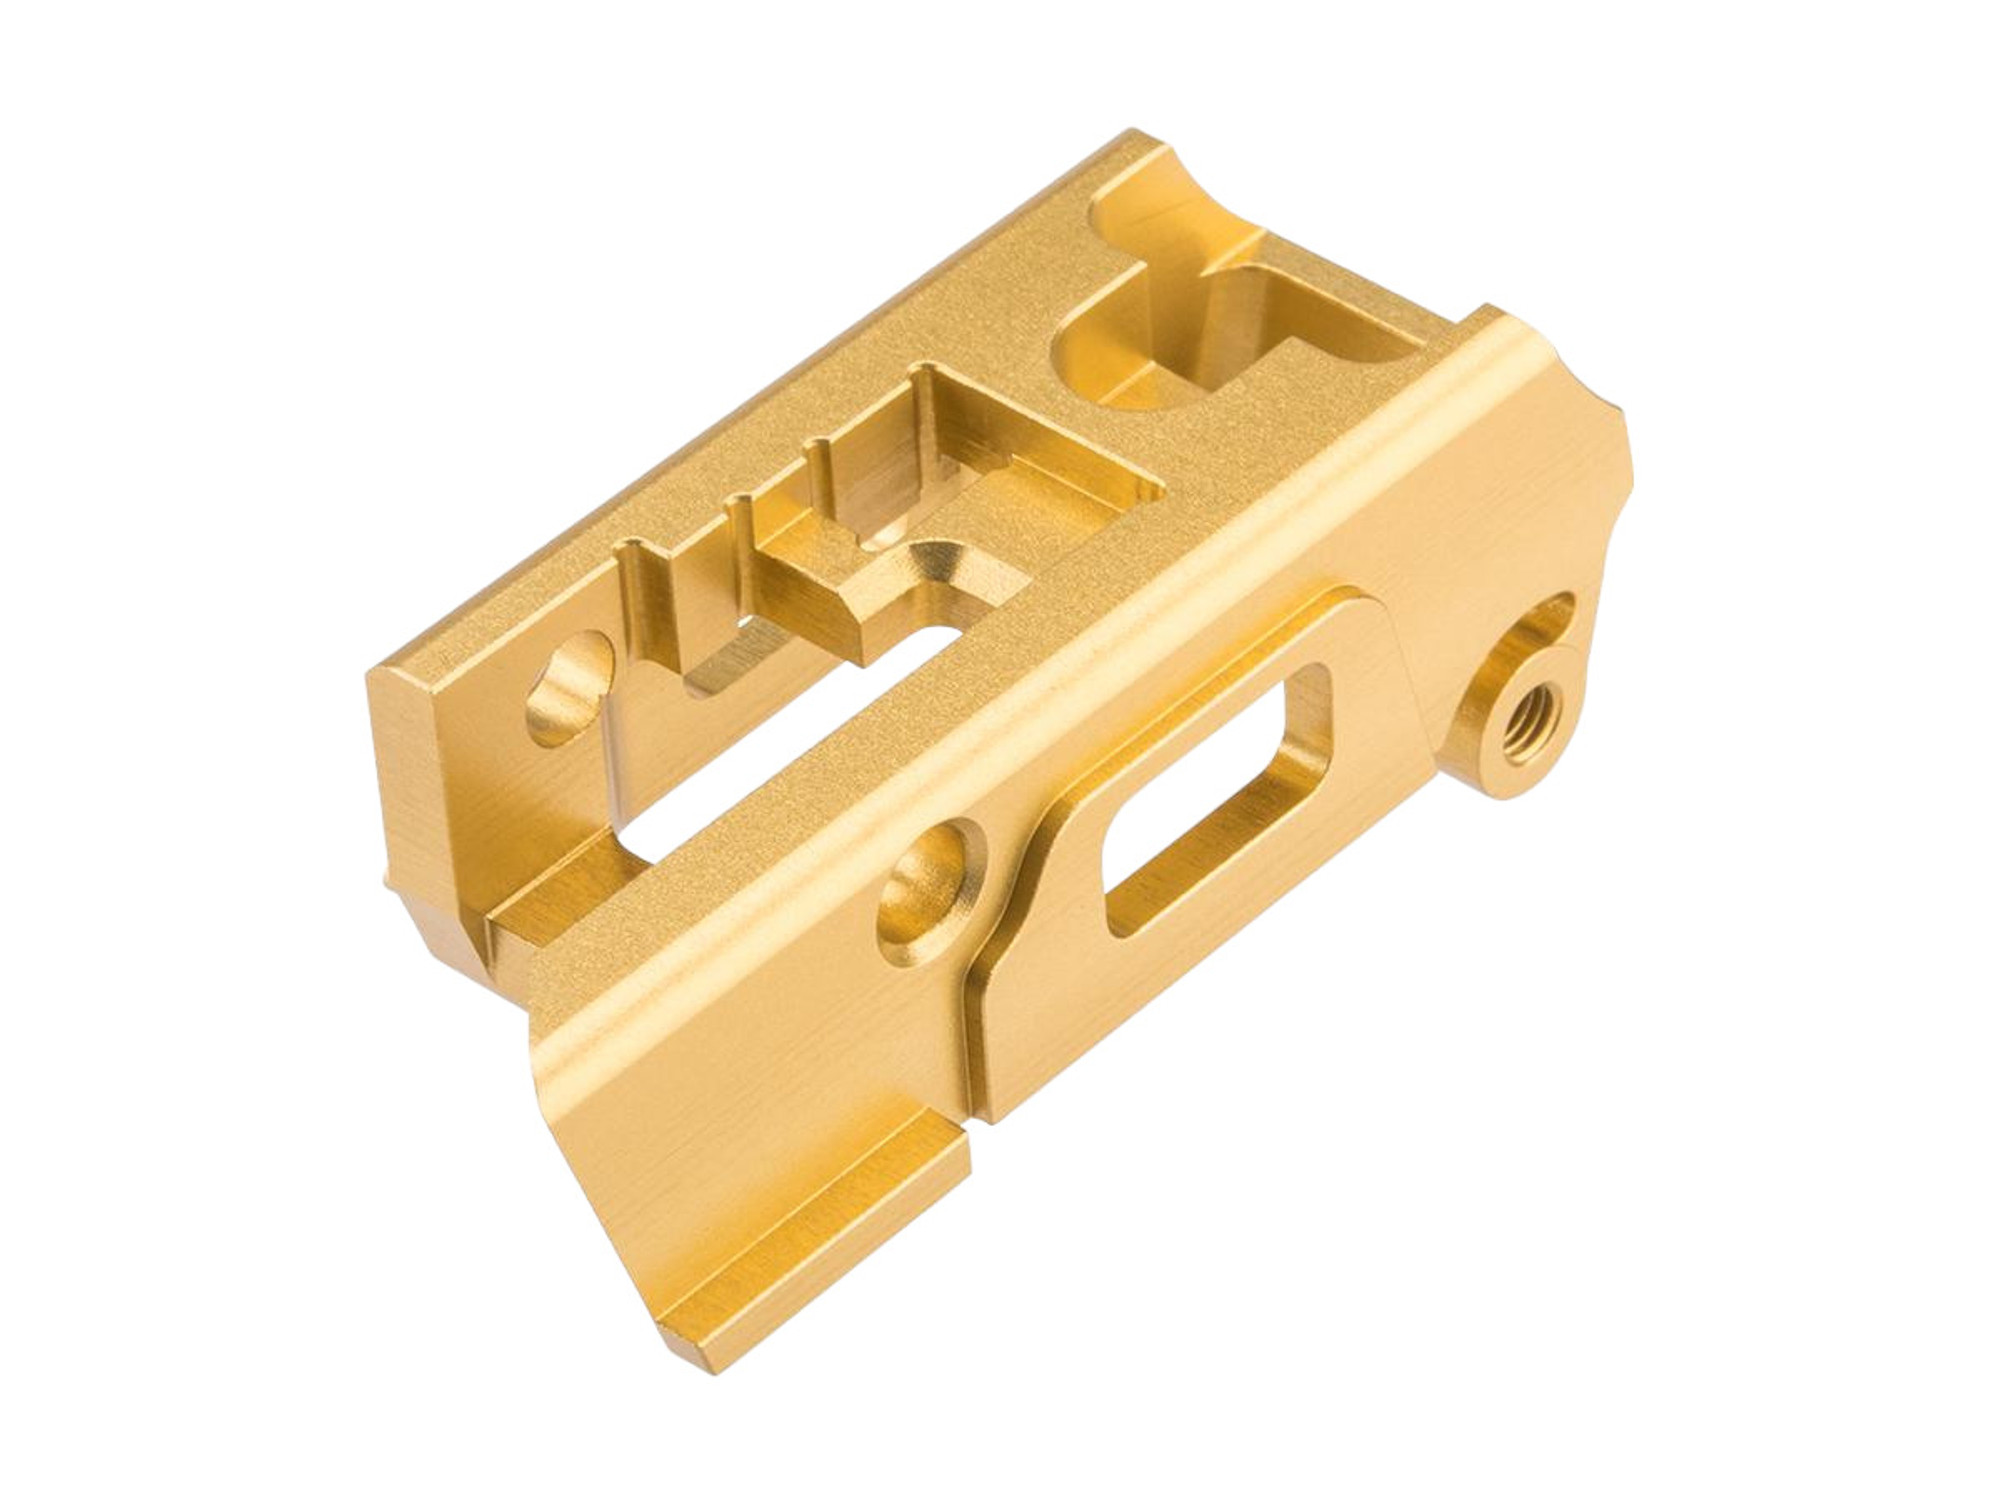 CowCow Technology Enhanced Trigger Housing for AAP-01 Airsoft Gas Blowback Pistol (Color: Gold)